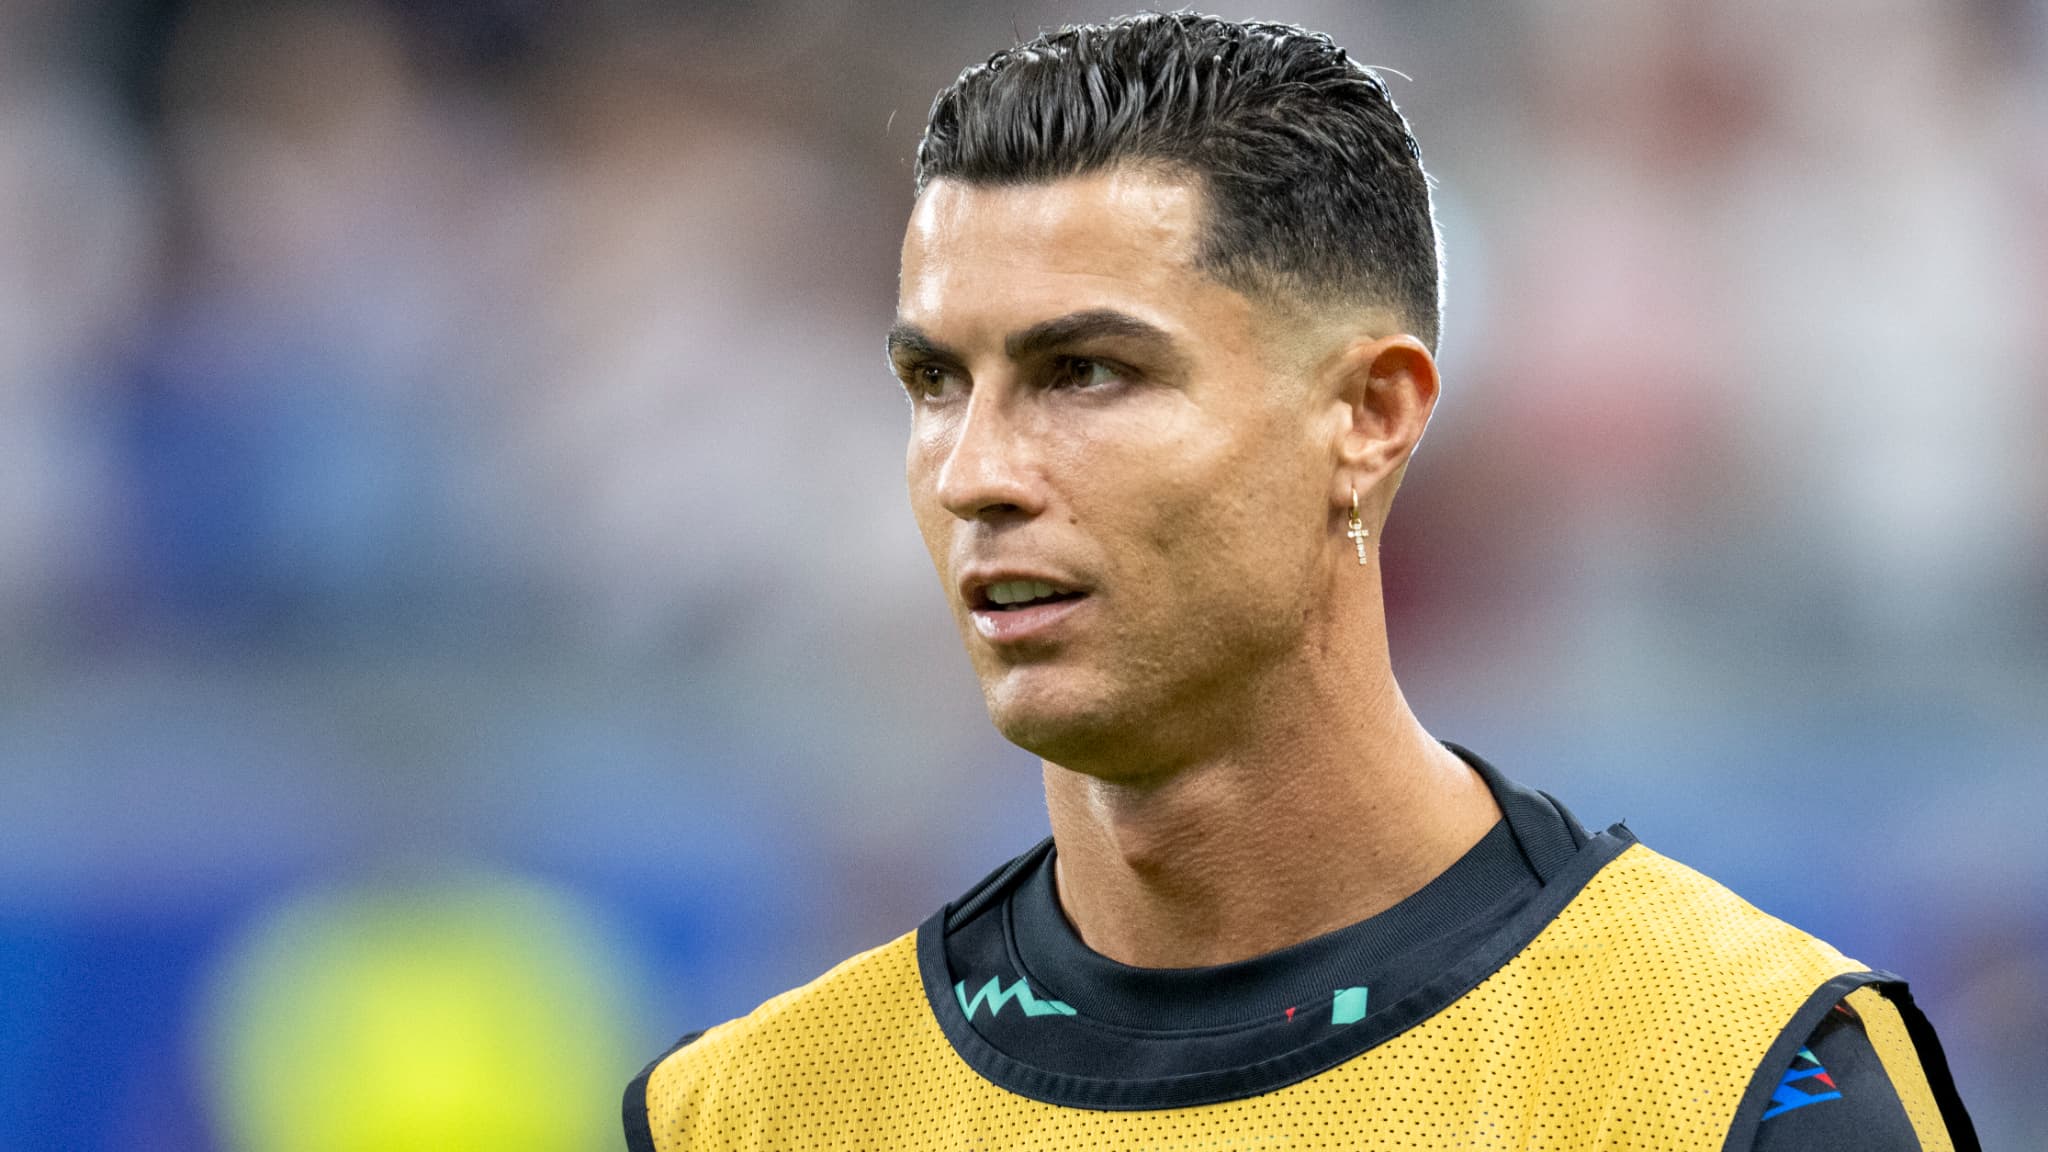 “We are going to war,” Cristiano Ronaldo begins the duel against the Blues